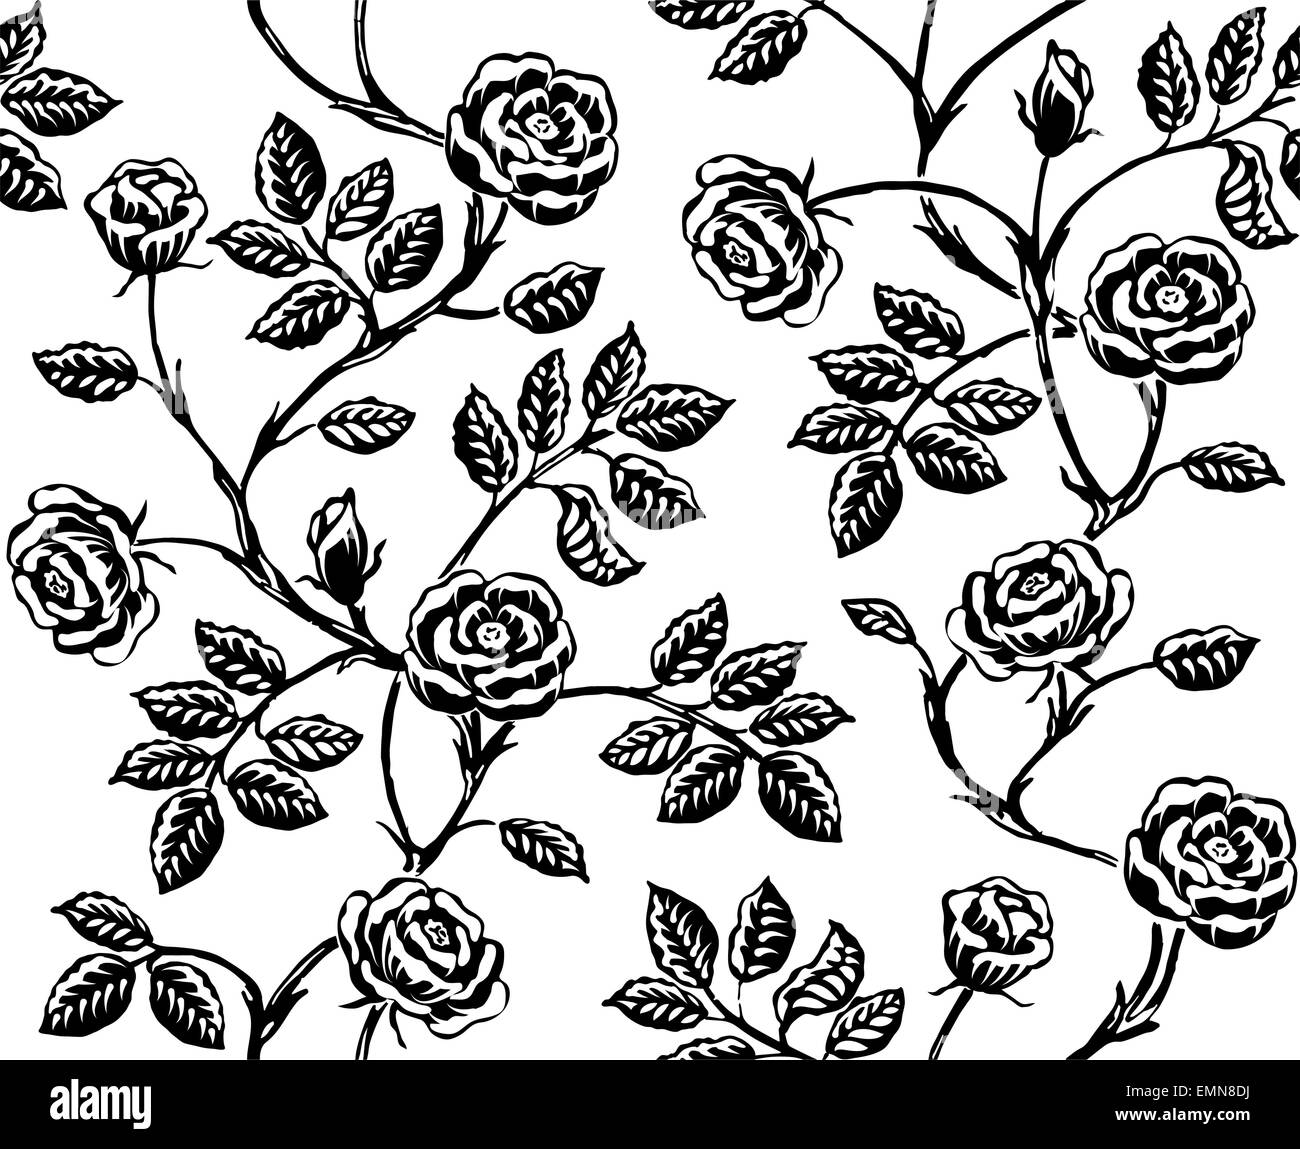 Rose pattern Black and White Stock Photos & Images - Alamy